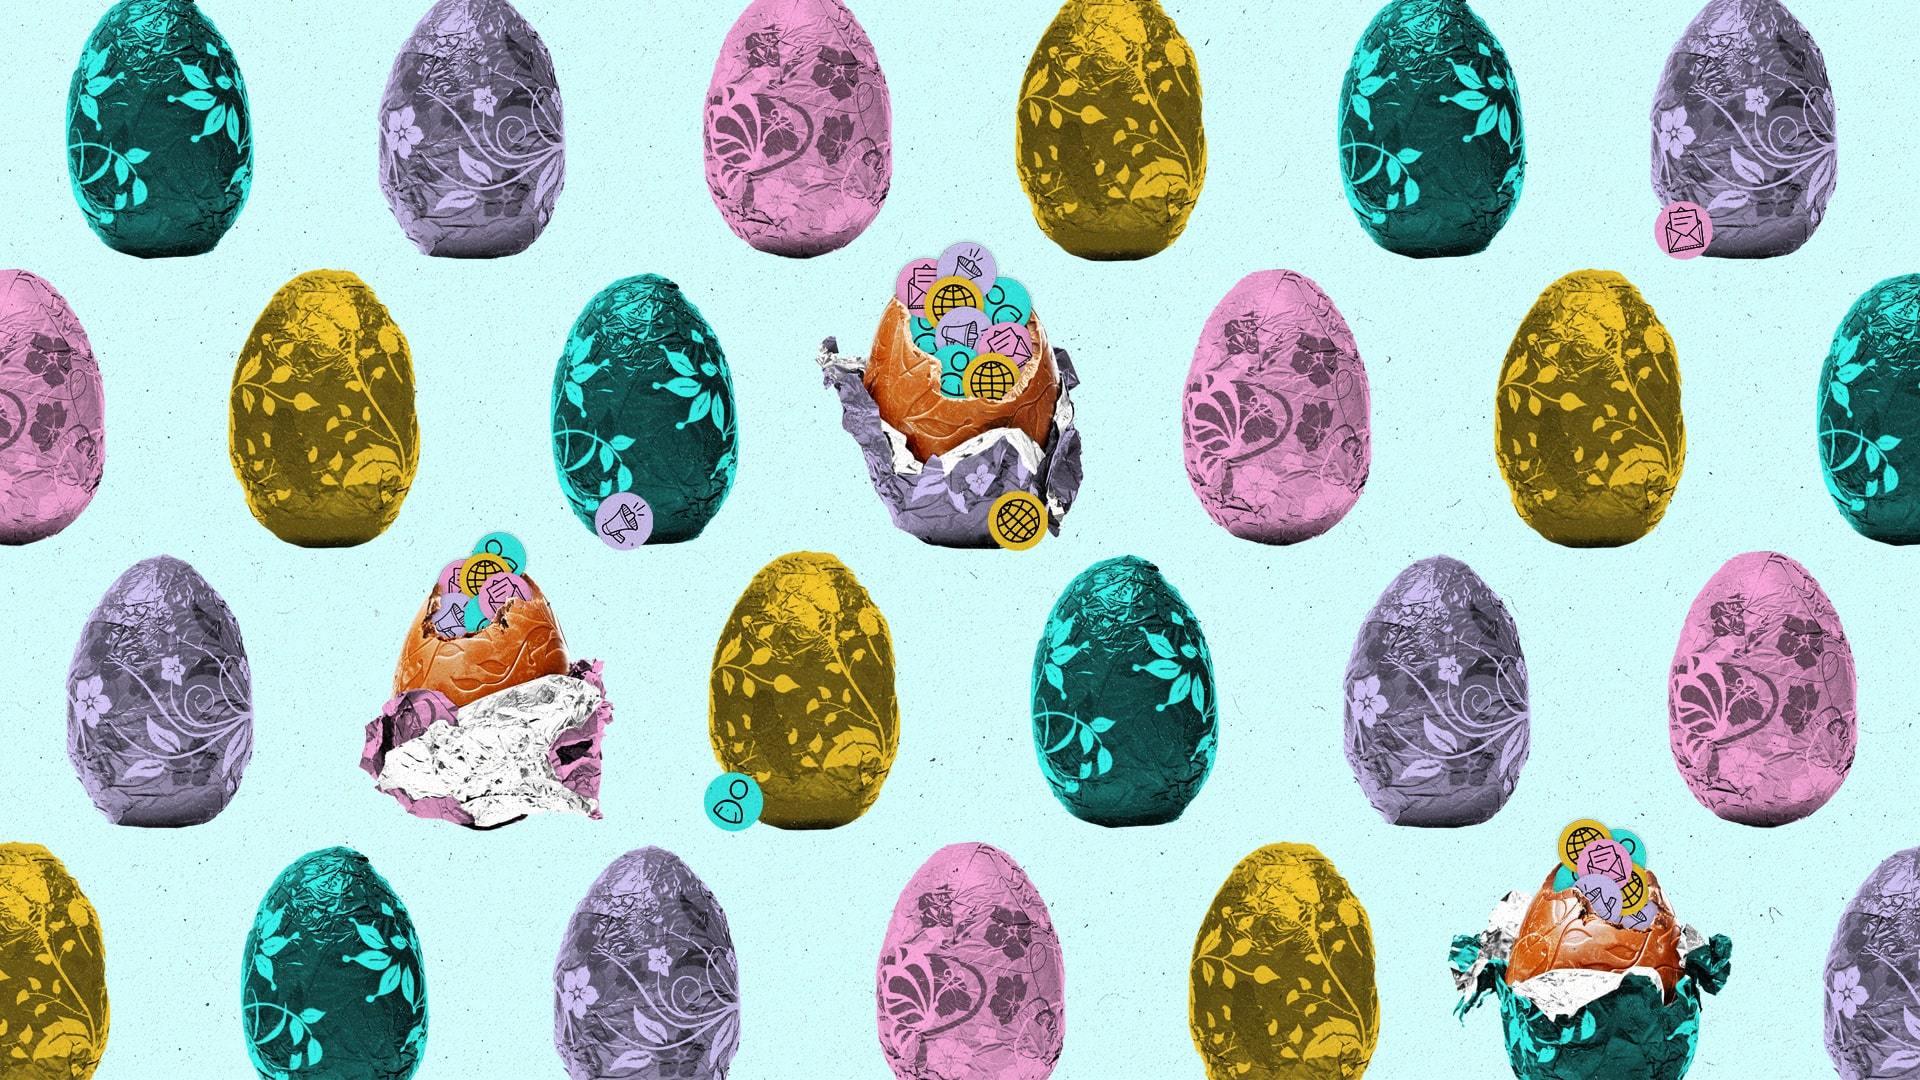 Chocolate eggs and fish filets: How brands can use first-party data to capitalize on Easter